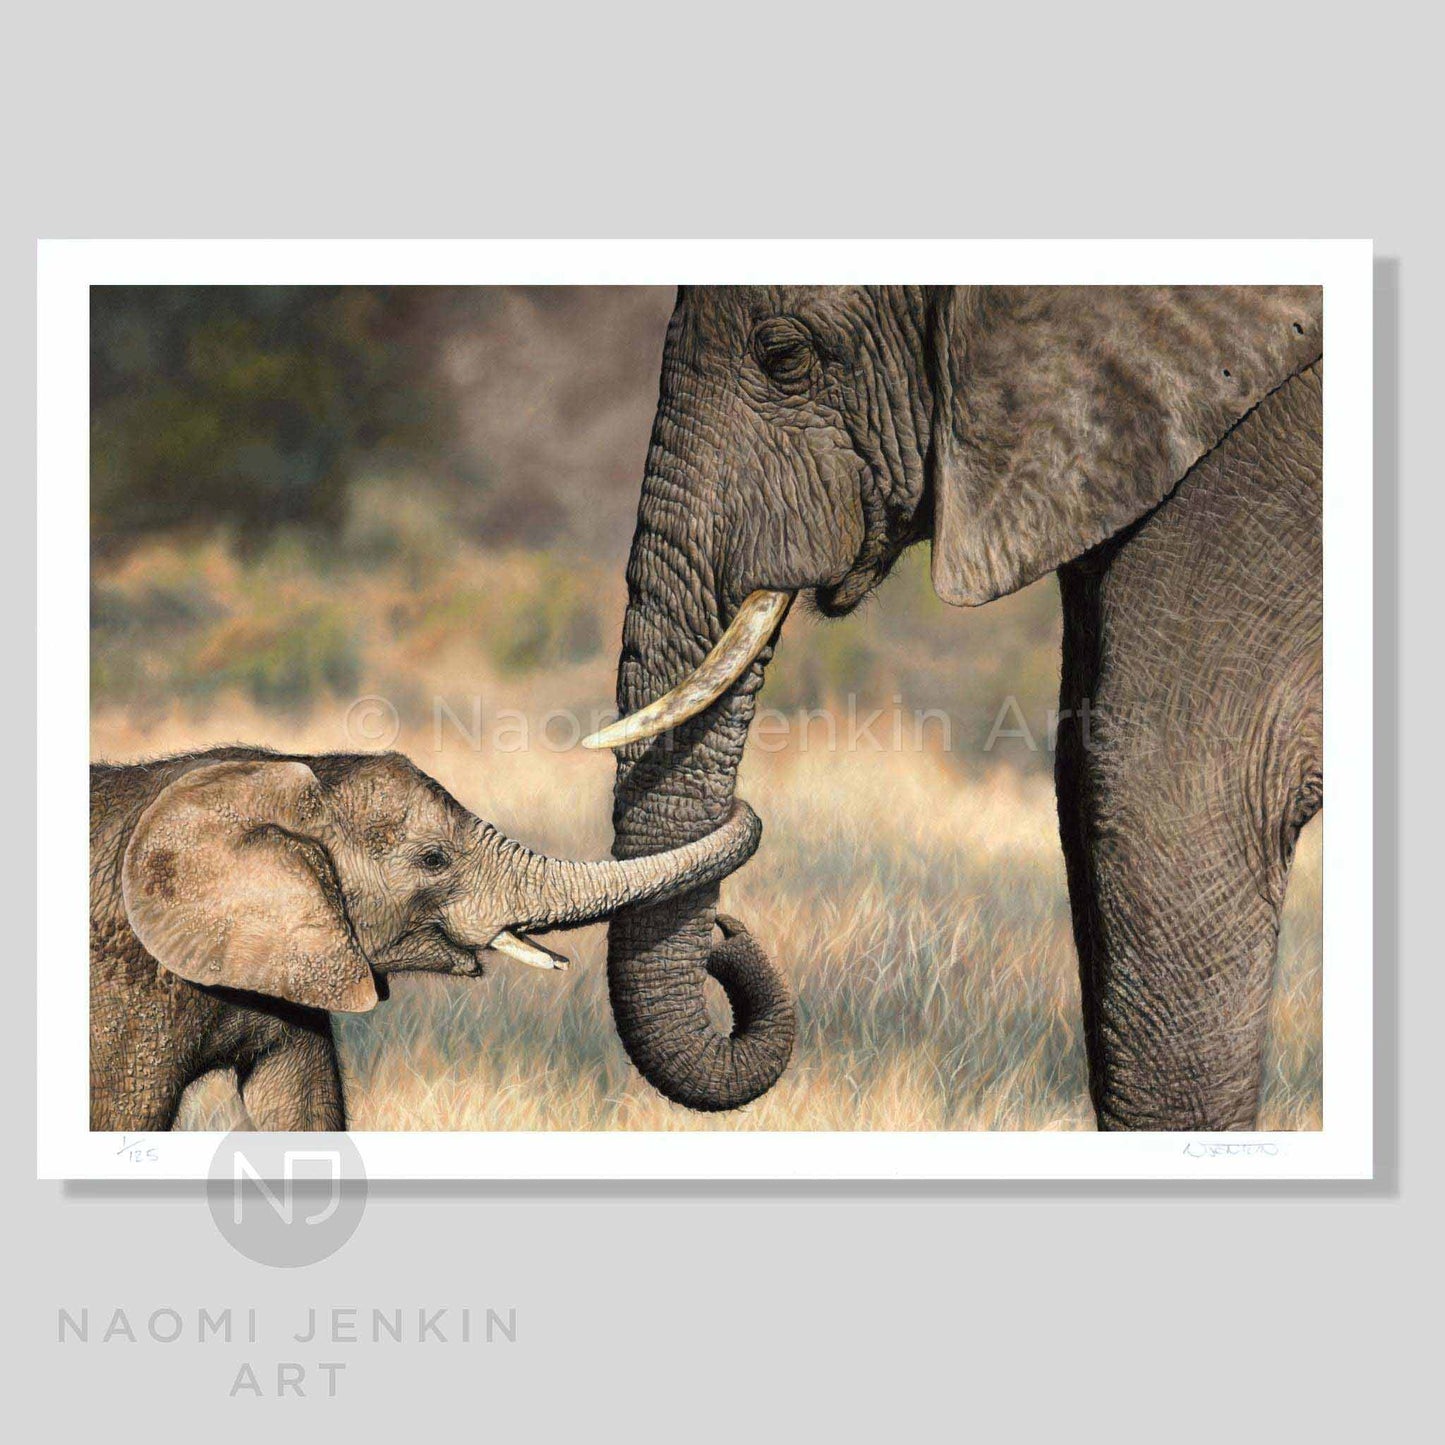 Elephant art print produced from an original pastel painting by Naomi Jenkin